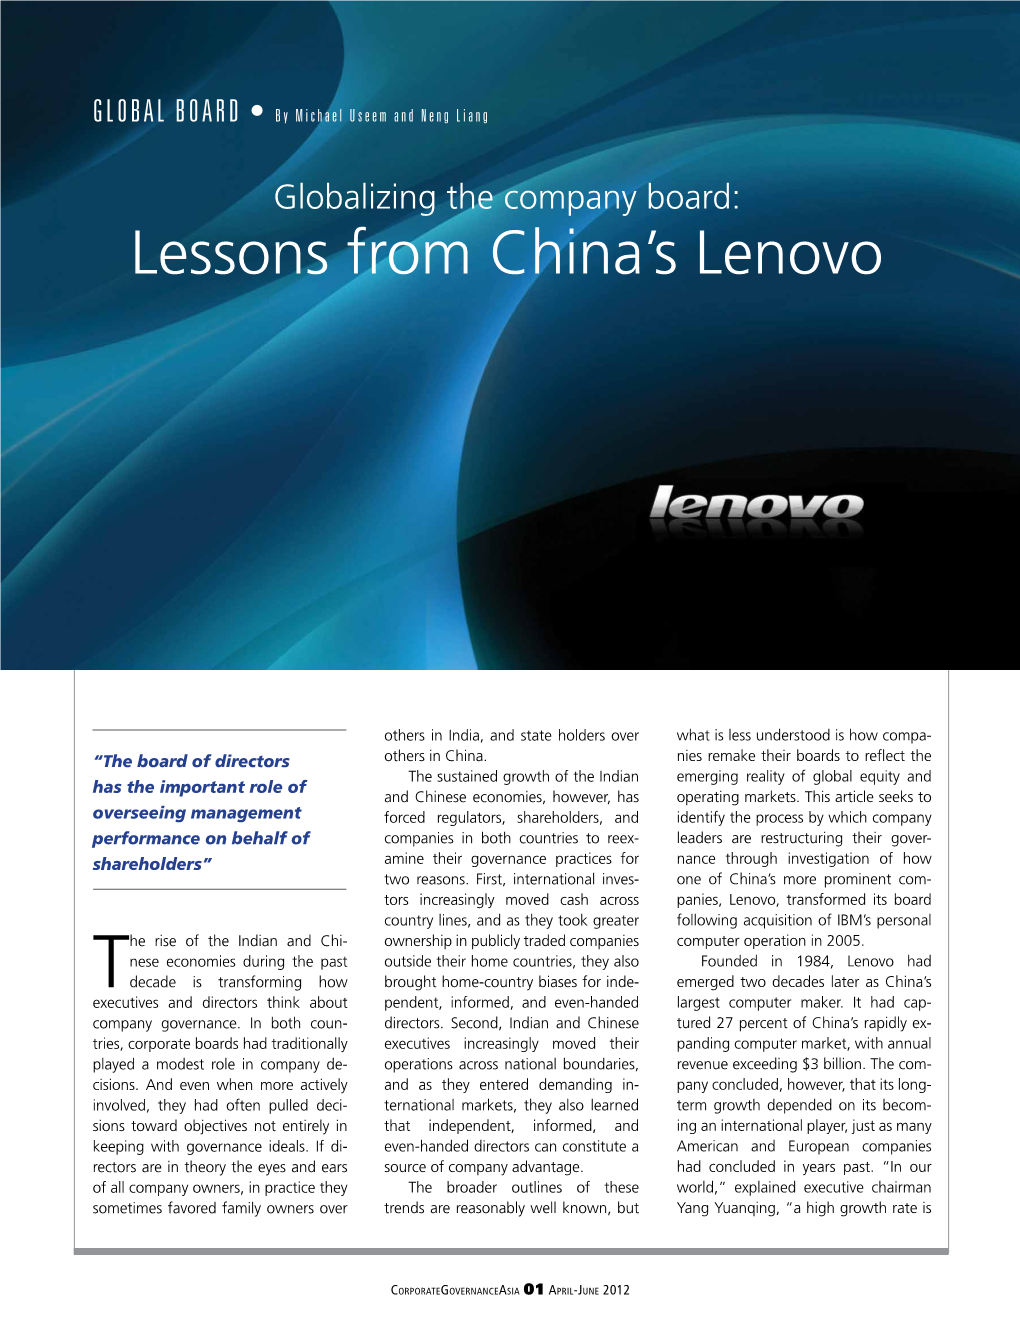 Lessons from China's Lenovo